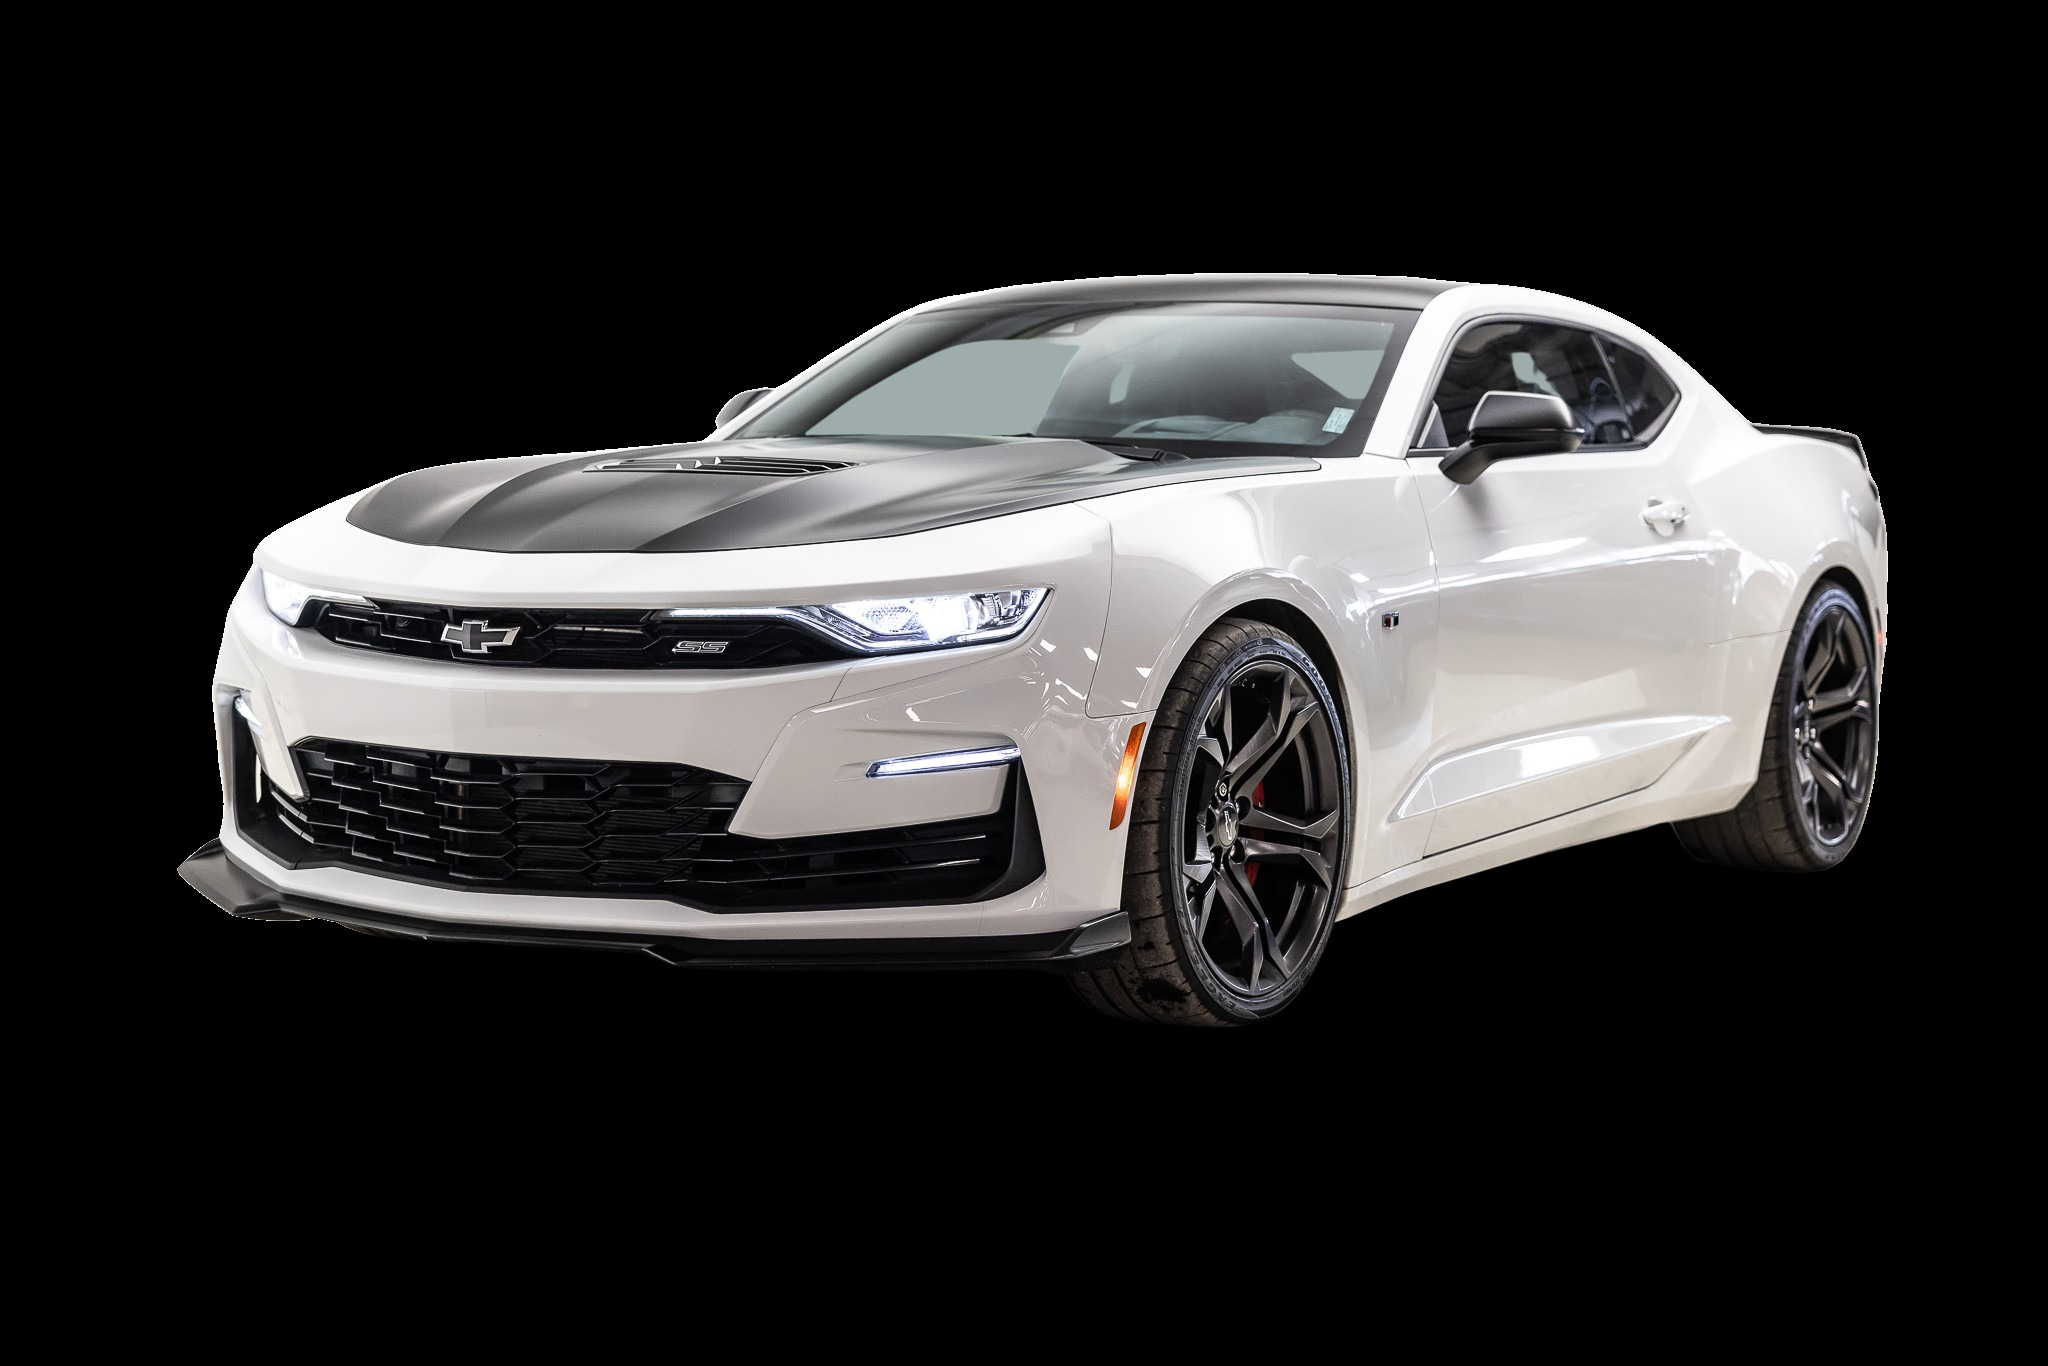 2020 Chevrolet Camaro 2dr Cpe 2SS 1LE - 6 -Speed